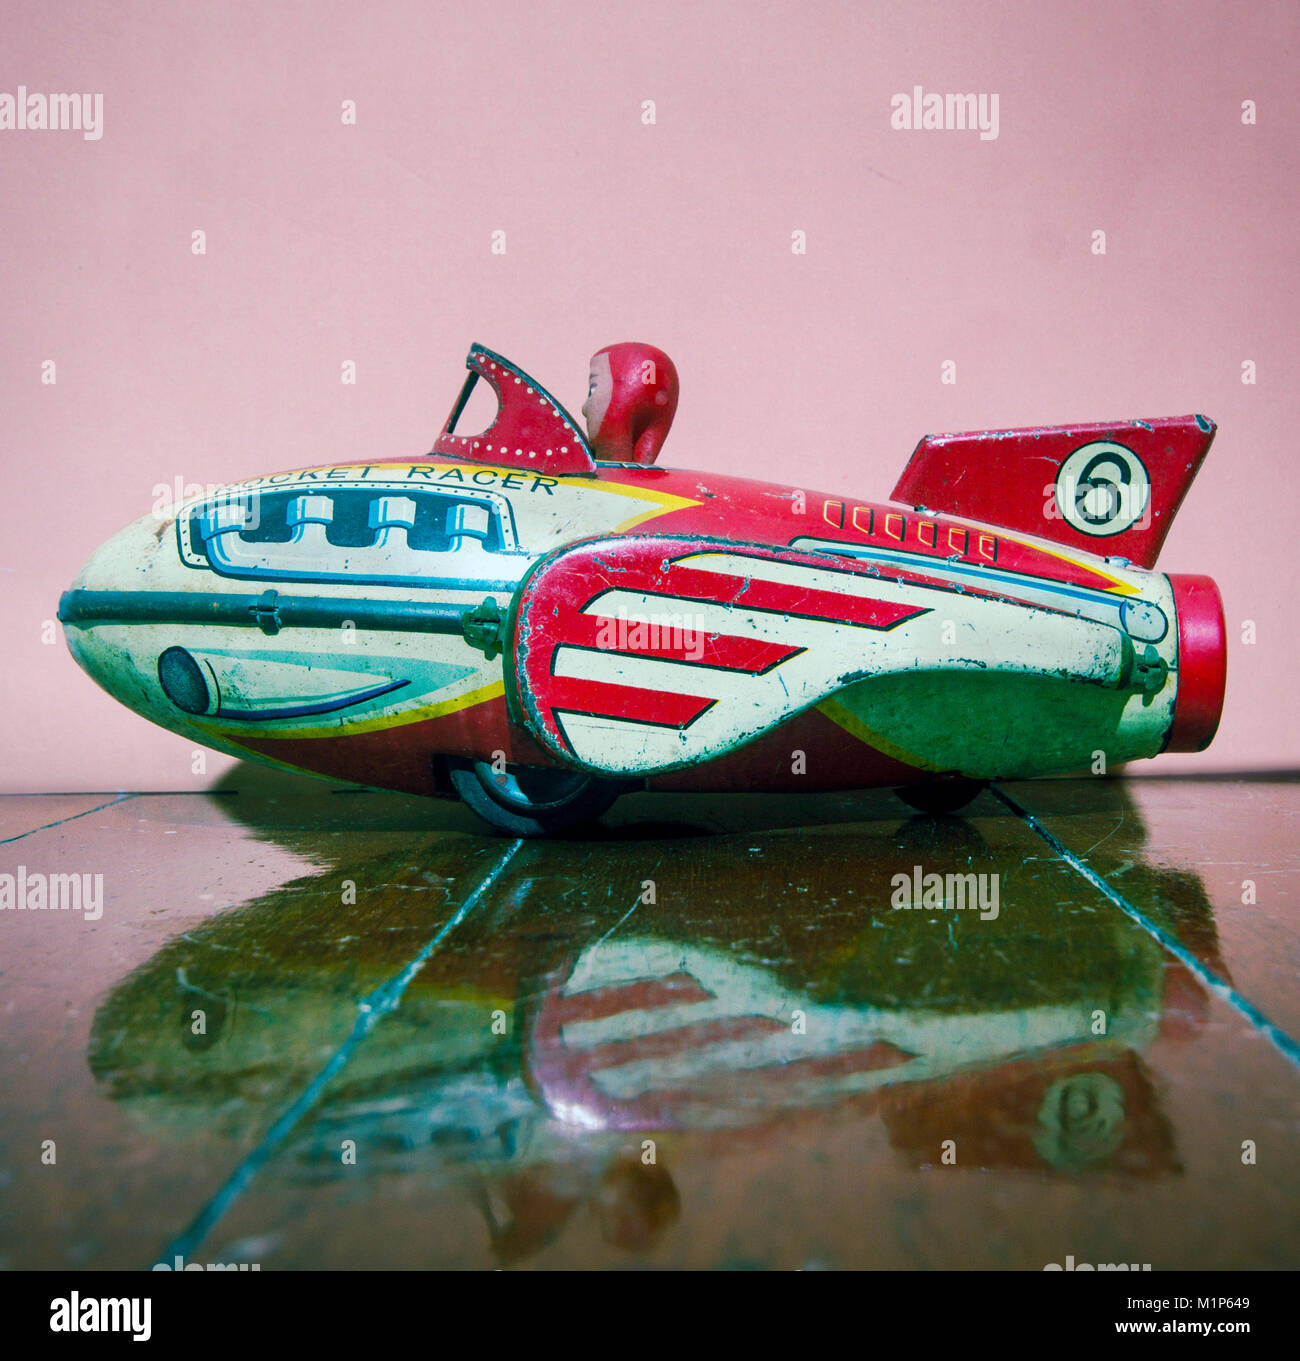 retro rocket tin toy close up on a wooden floor with reflection Stock Photo